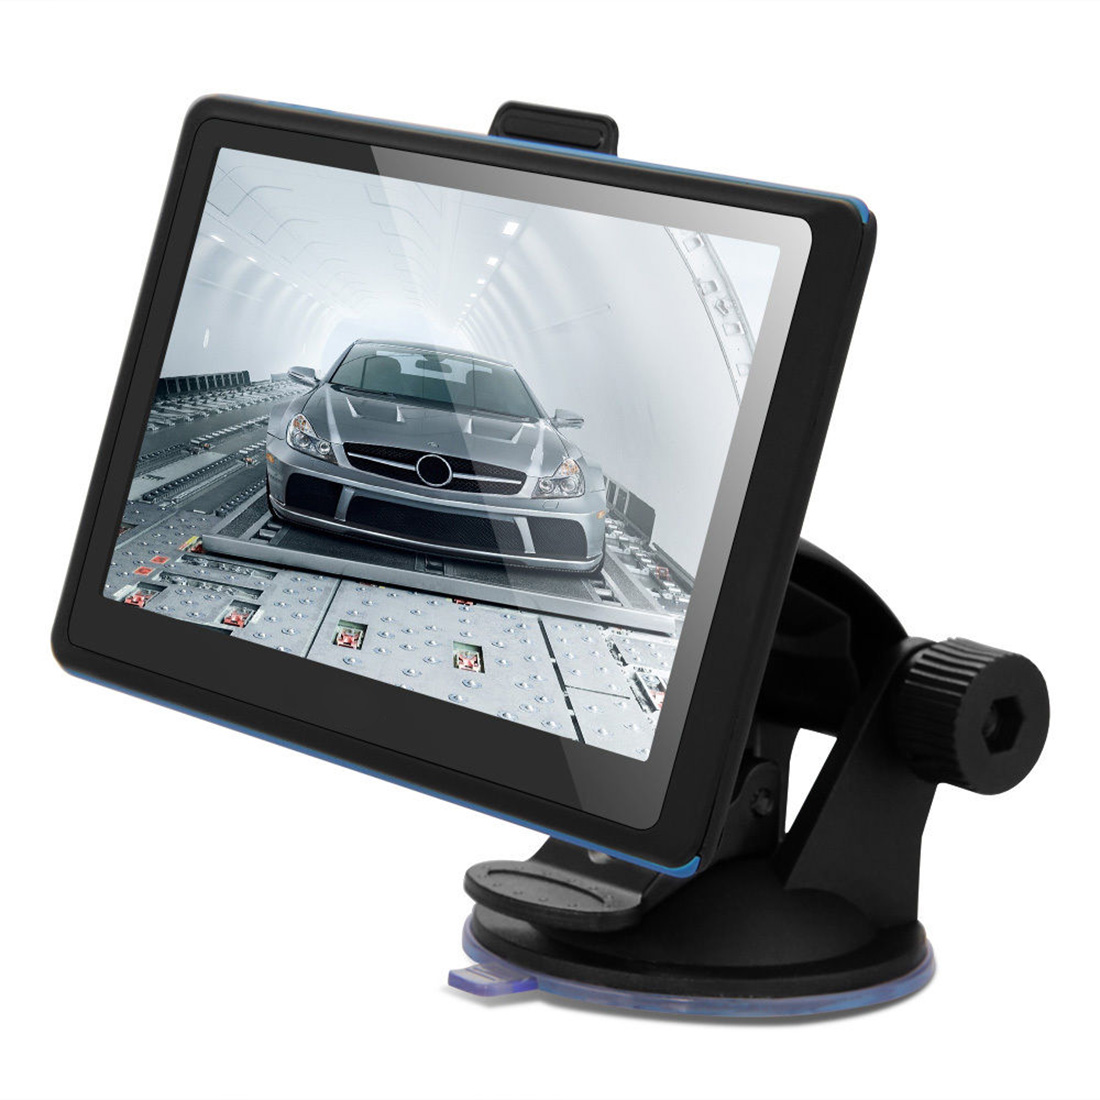 New 5 inch High Definition Touchscreen Car GPS Navigation With FM Transmission 128MB Graphics Card 8GB